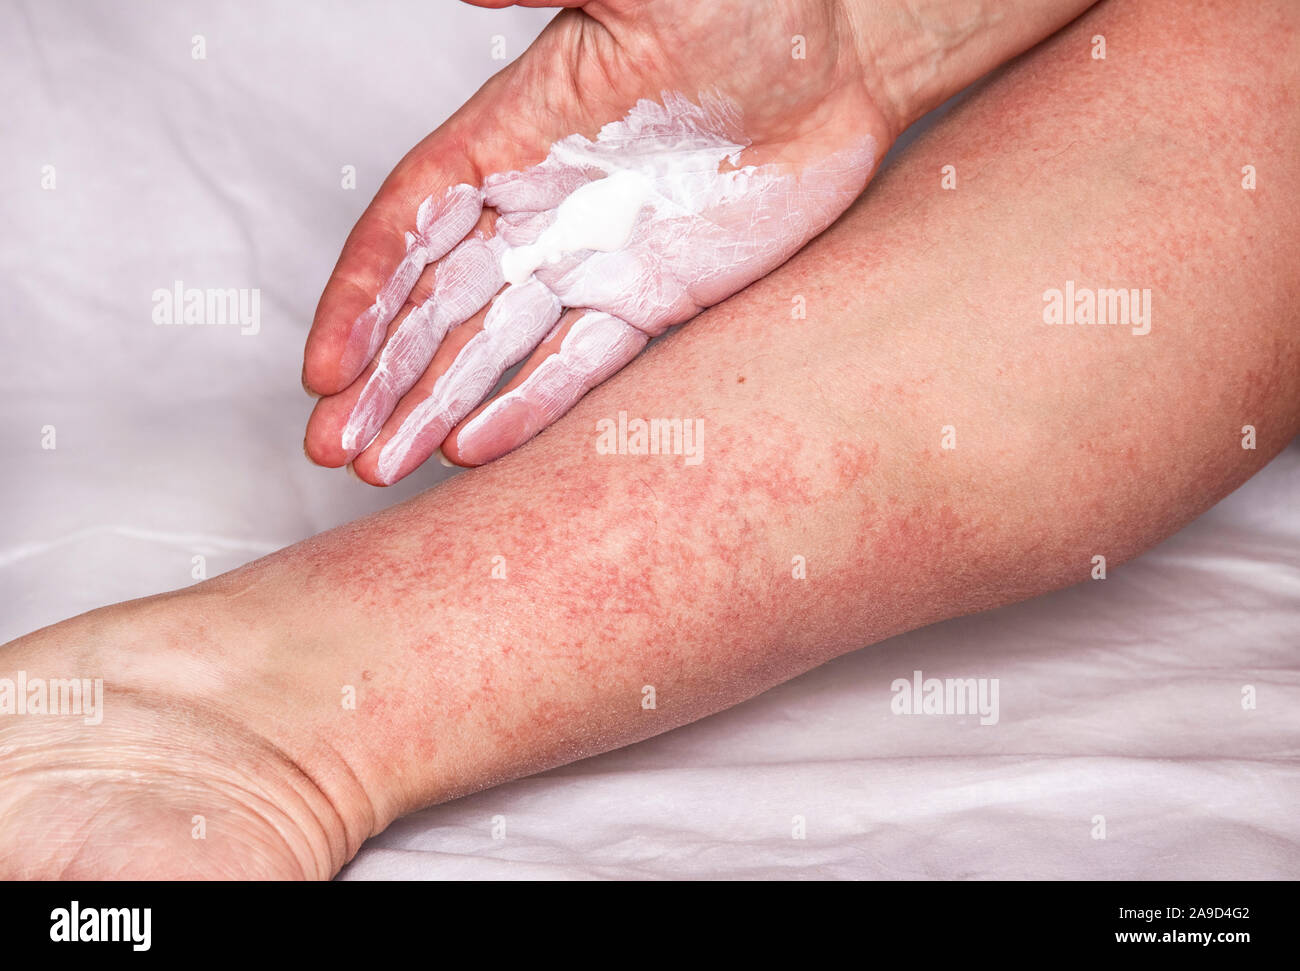 White ointment on the palm soothing rash from an allergic reaction. Applying a therapeutic ointment for allergic rashes on the leg. Treatment of aller Stock Photo